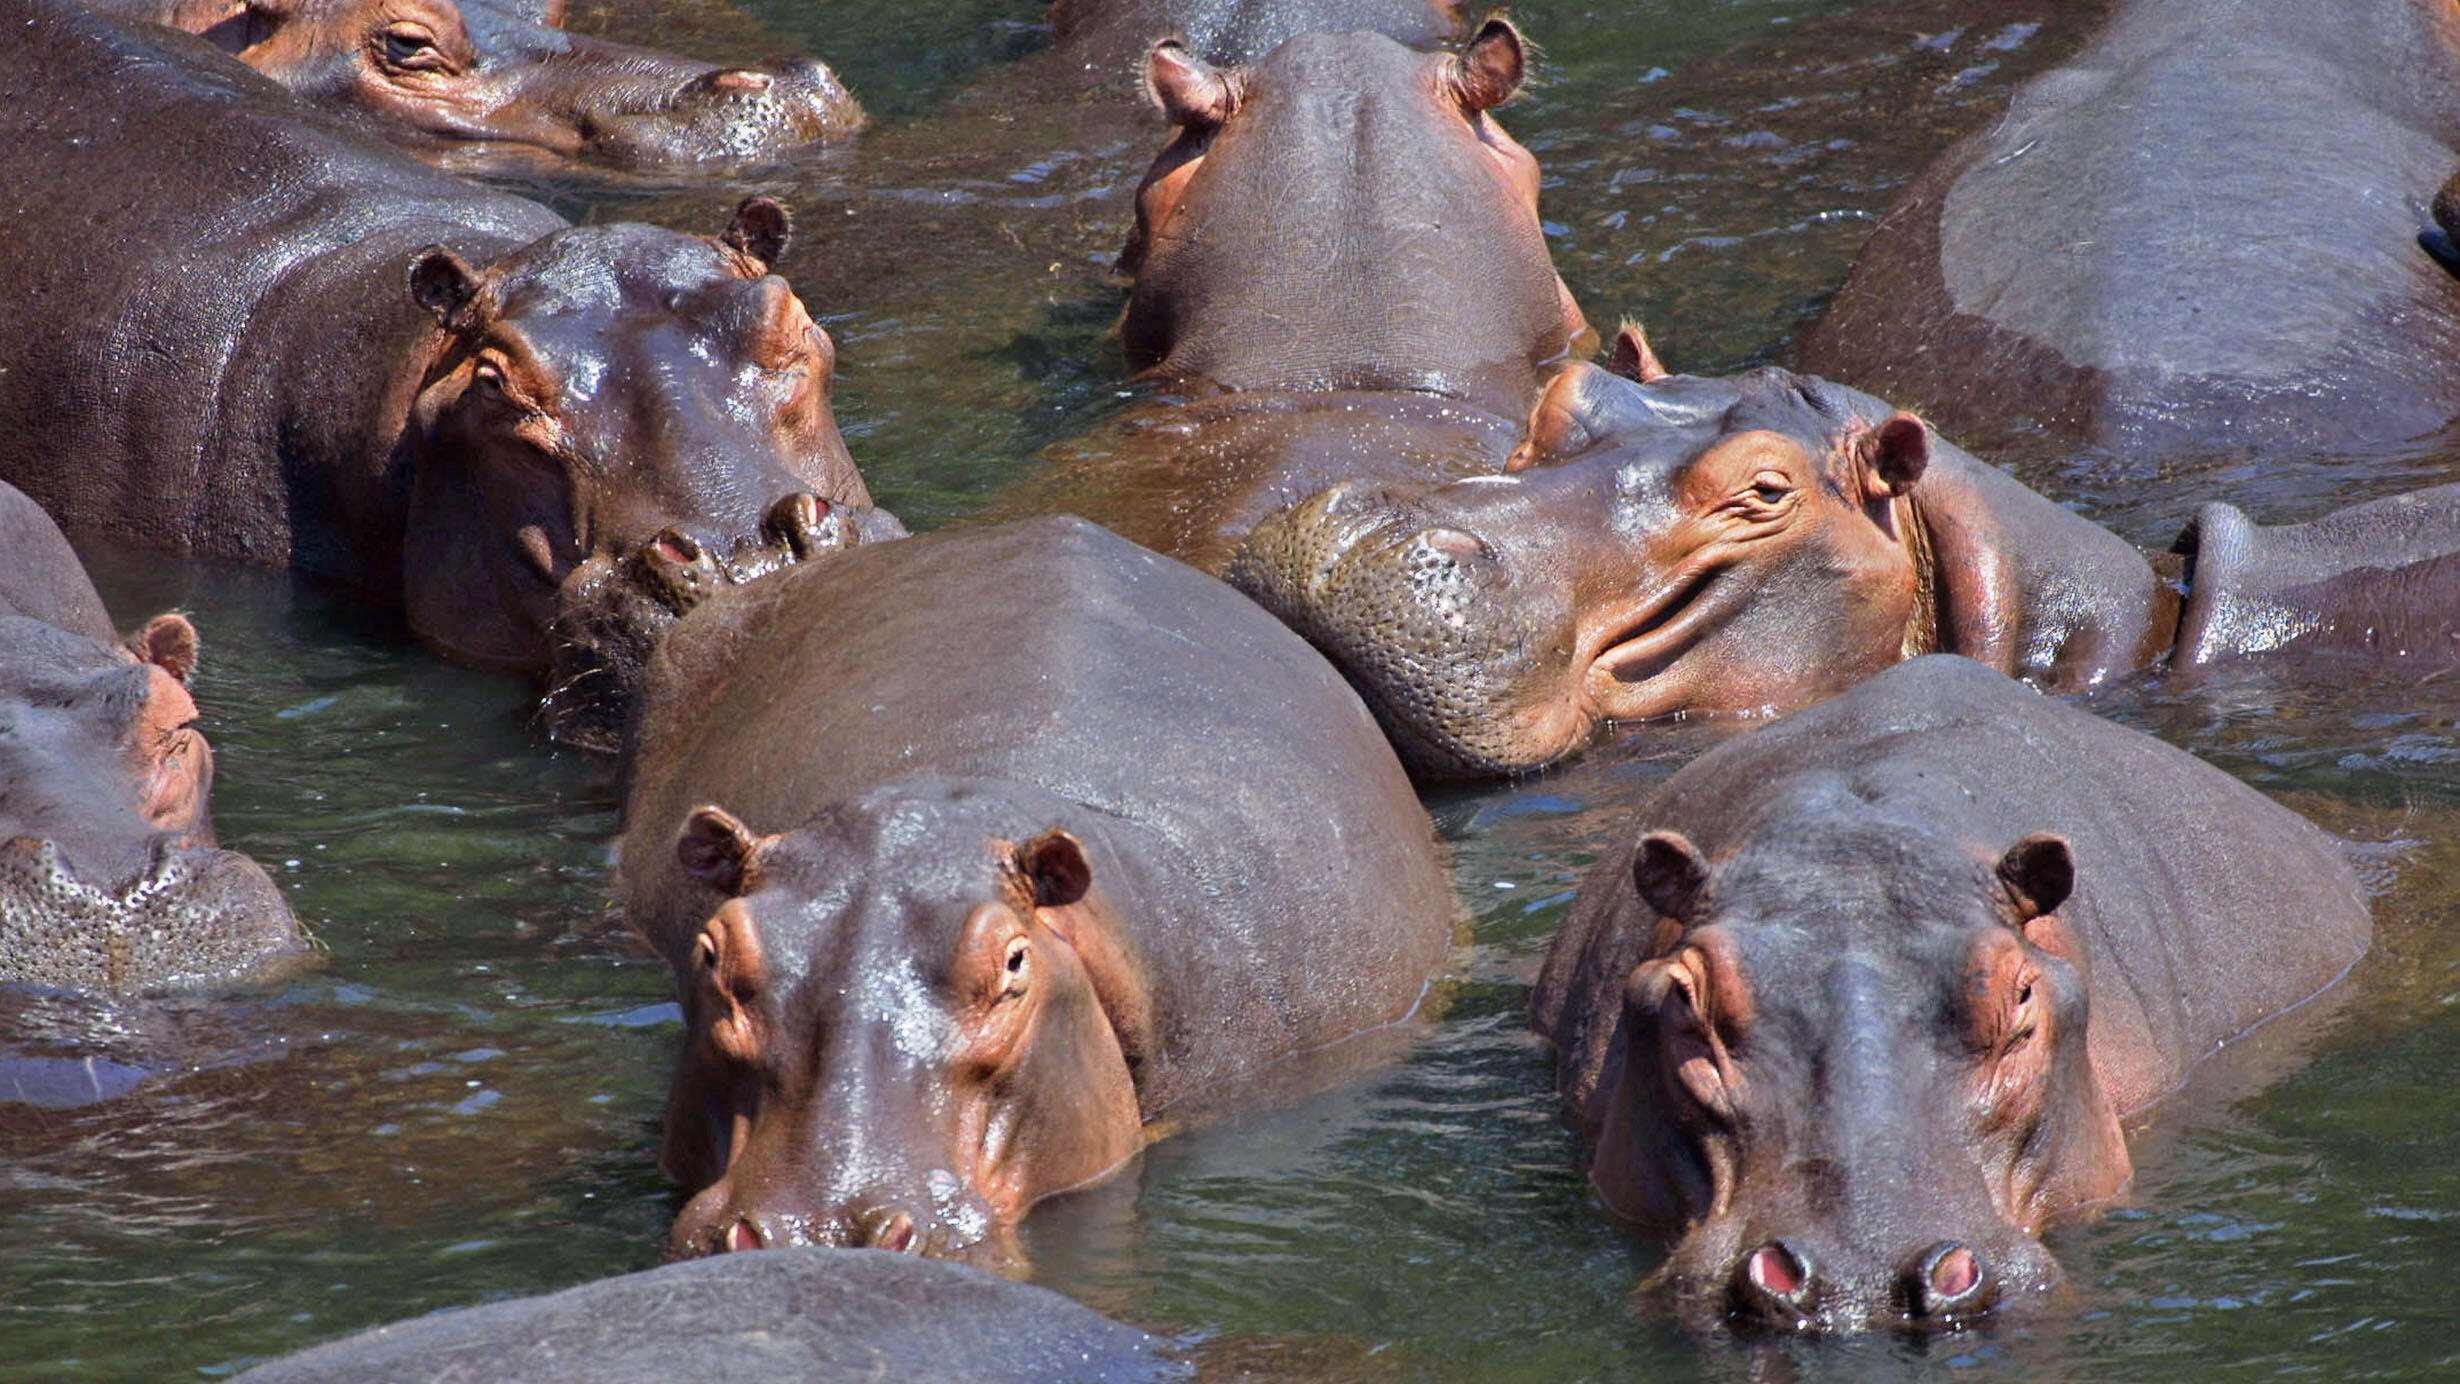 A group of eight hippos partially submerged in murky waters.